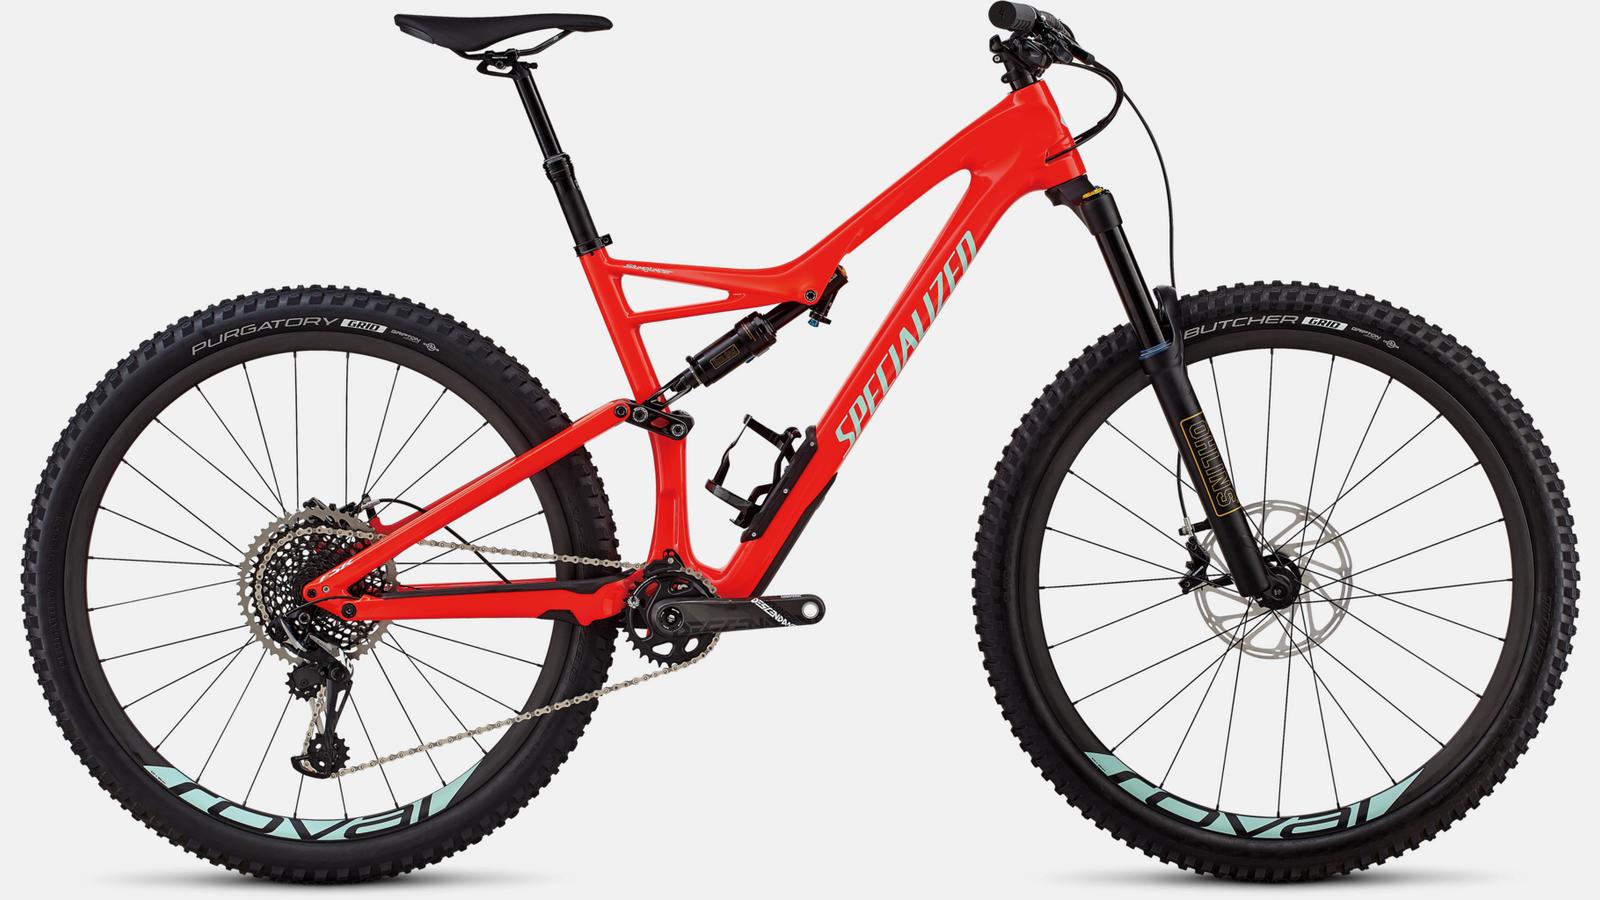 Touch-up paint for 2018 Specialized Stumpjumper Pro 29/6Fattie - Gloss Rocket Red